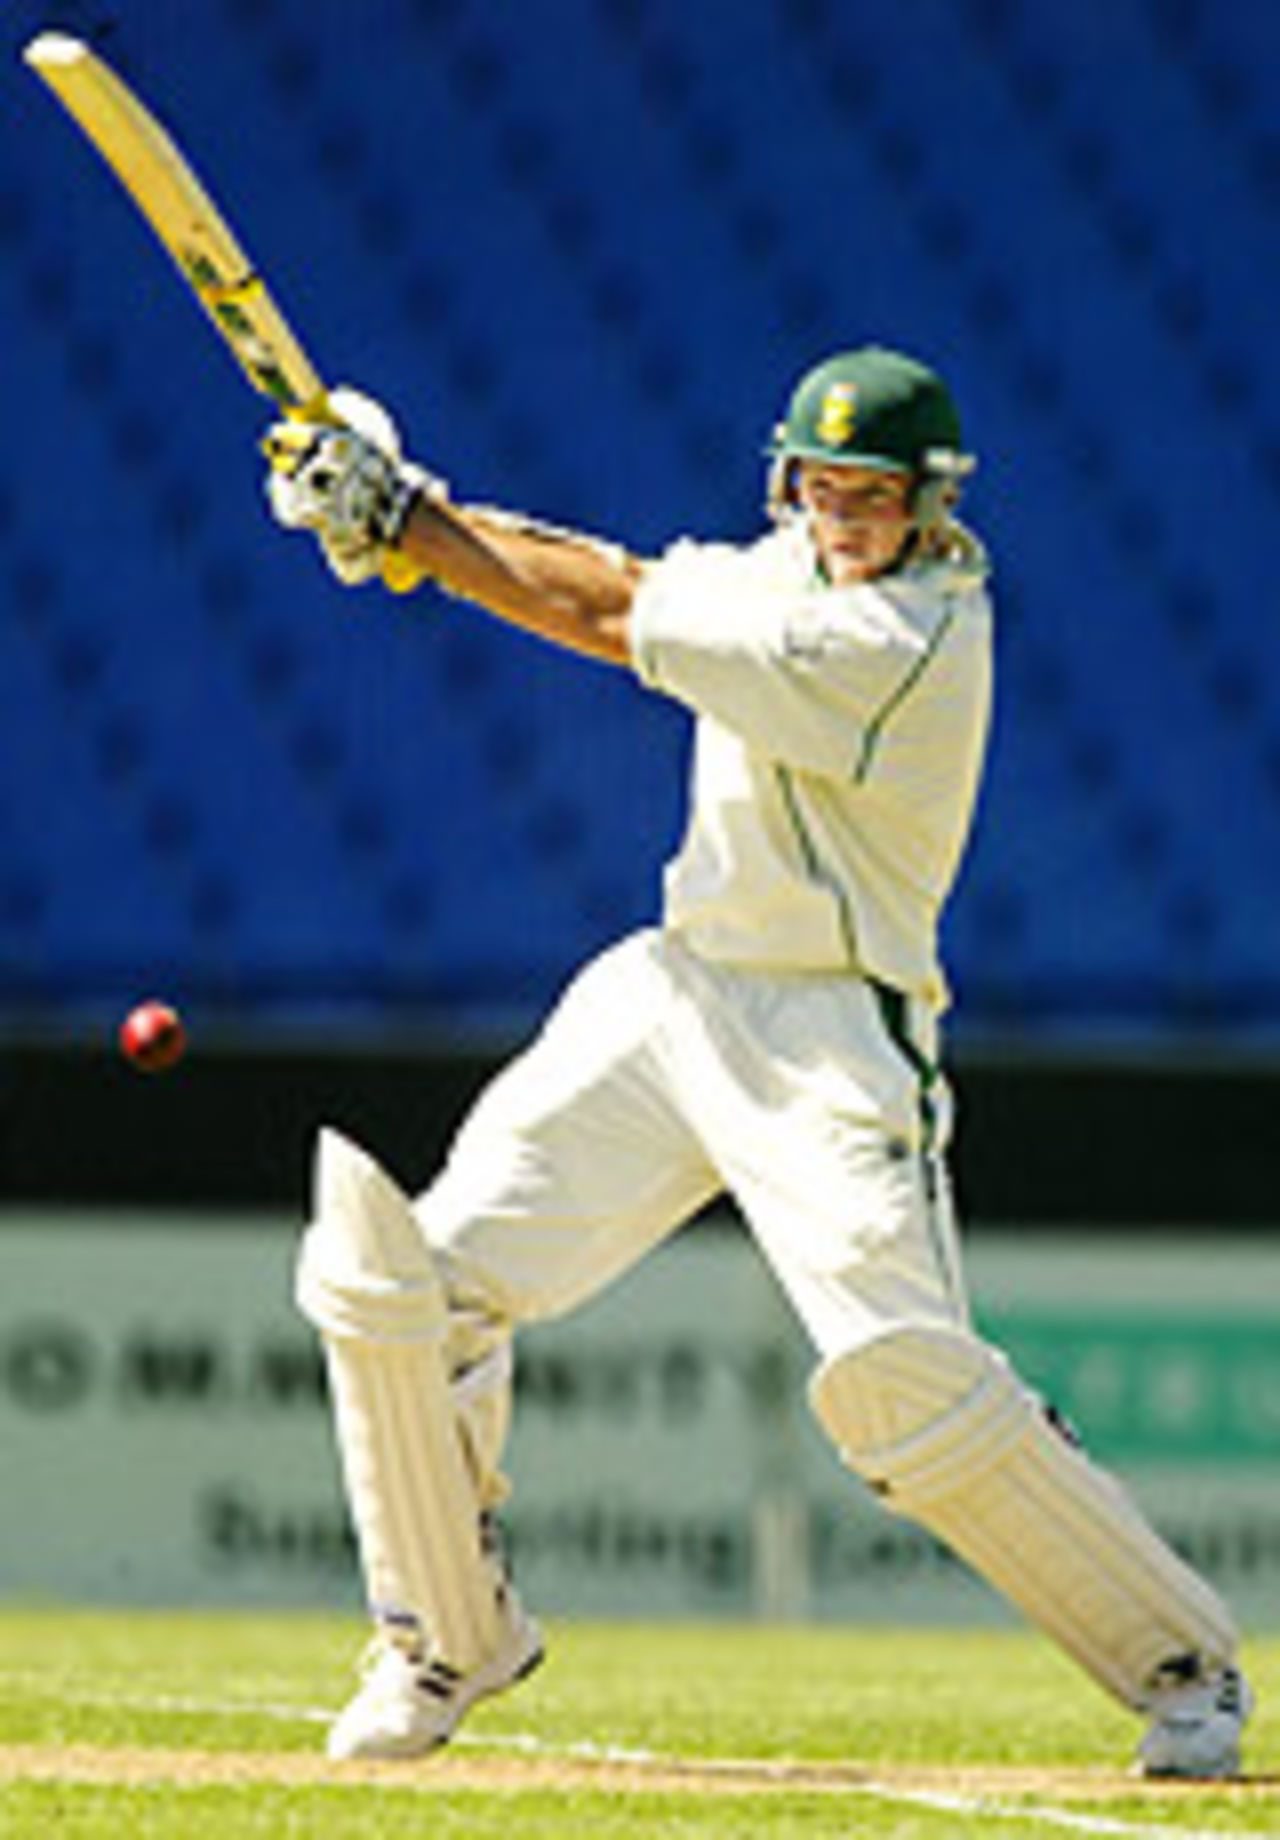 Graeme Smith gives the ball an almighty whack, New Zealand v South Africa, 2nd Test, Auckland, 1st day, March 18, 2004